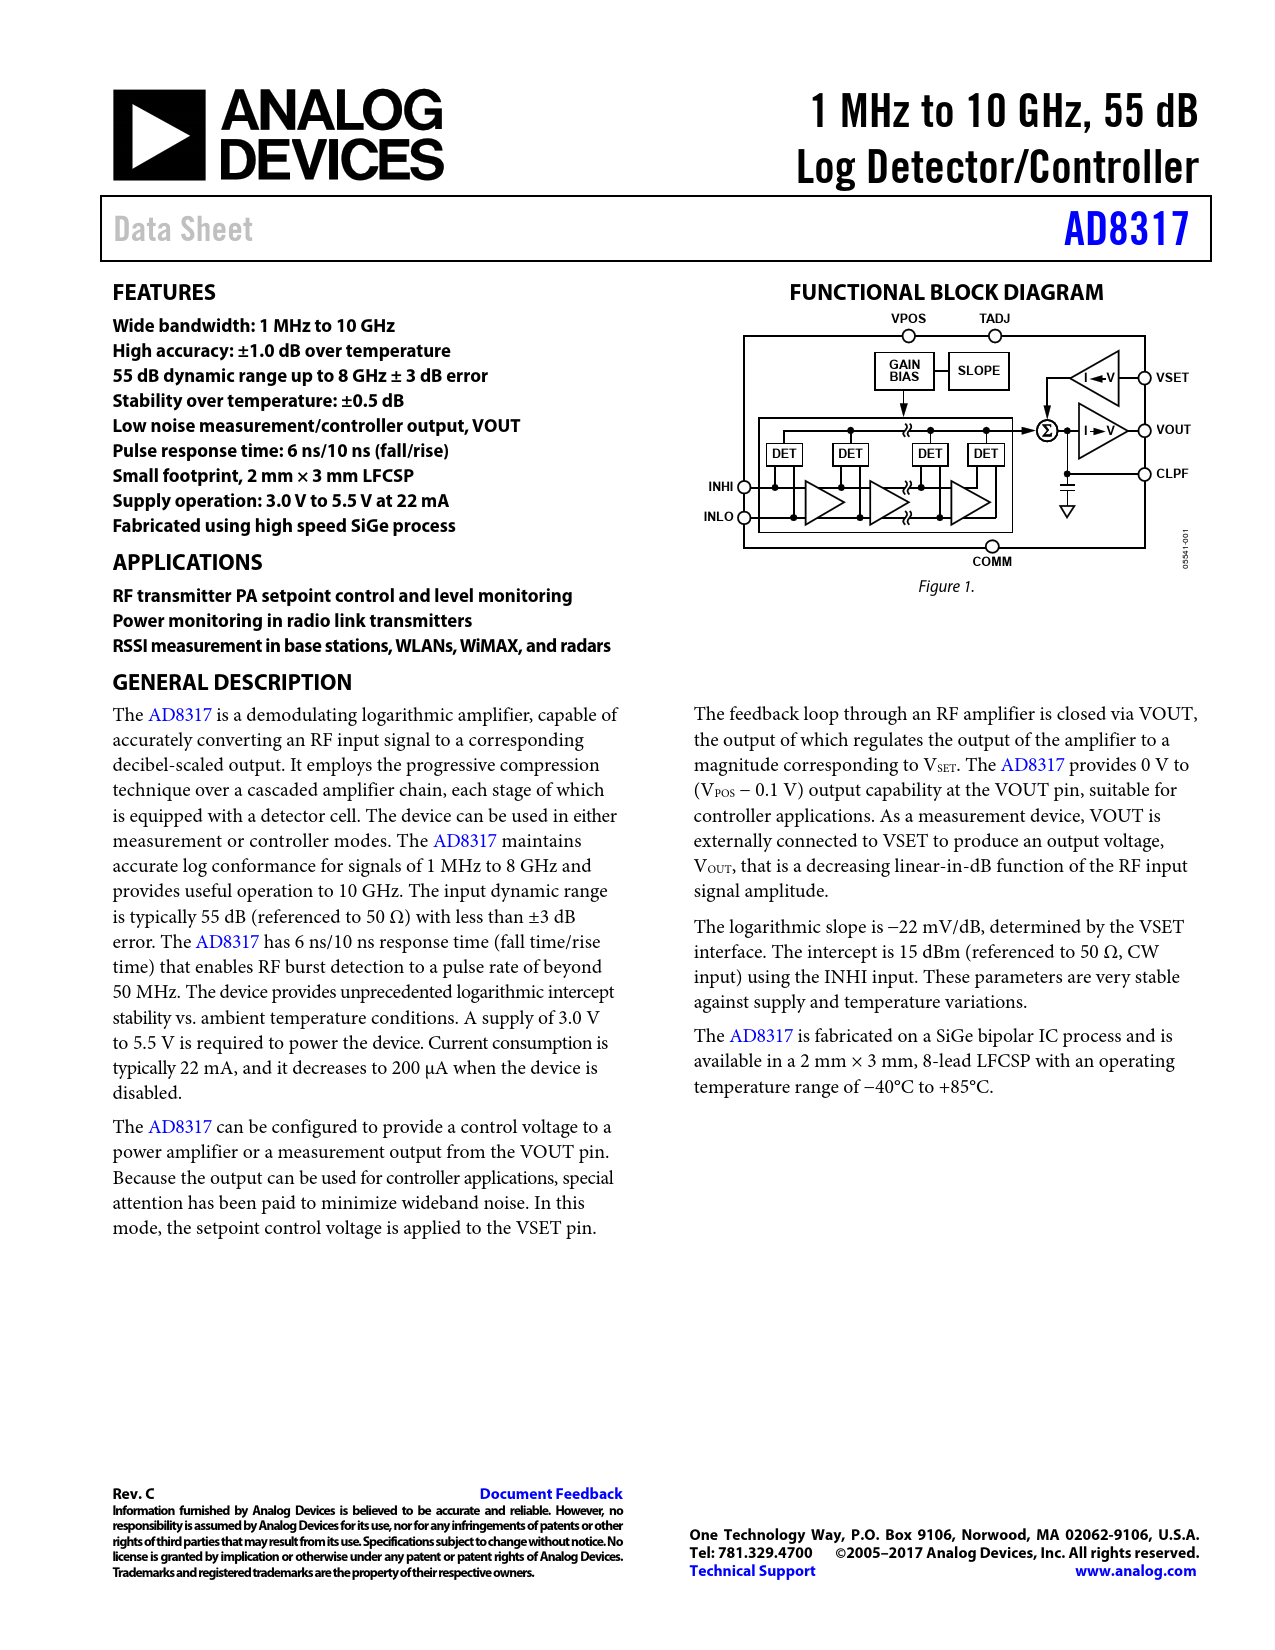 datasheet-ad8317-analog-devices-revision-c-preview-and-download